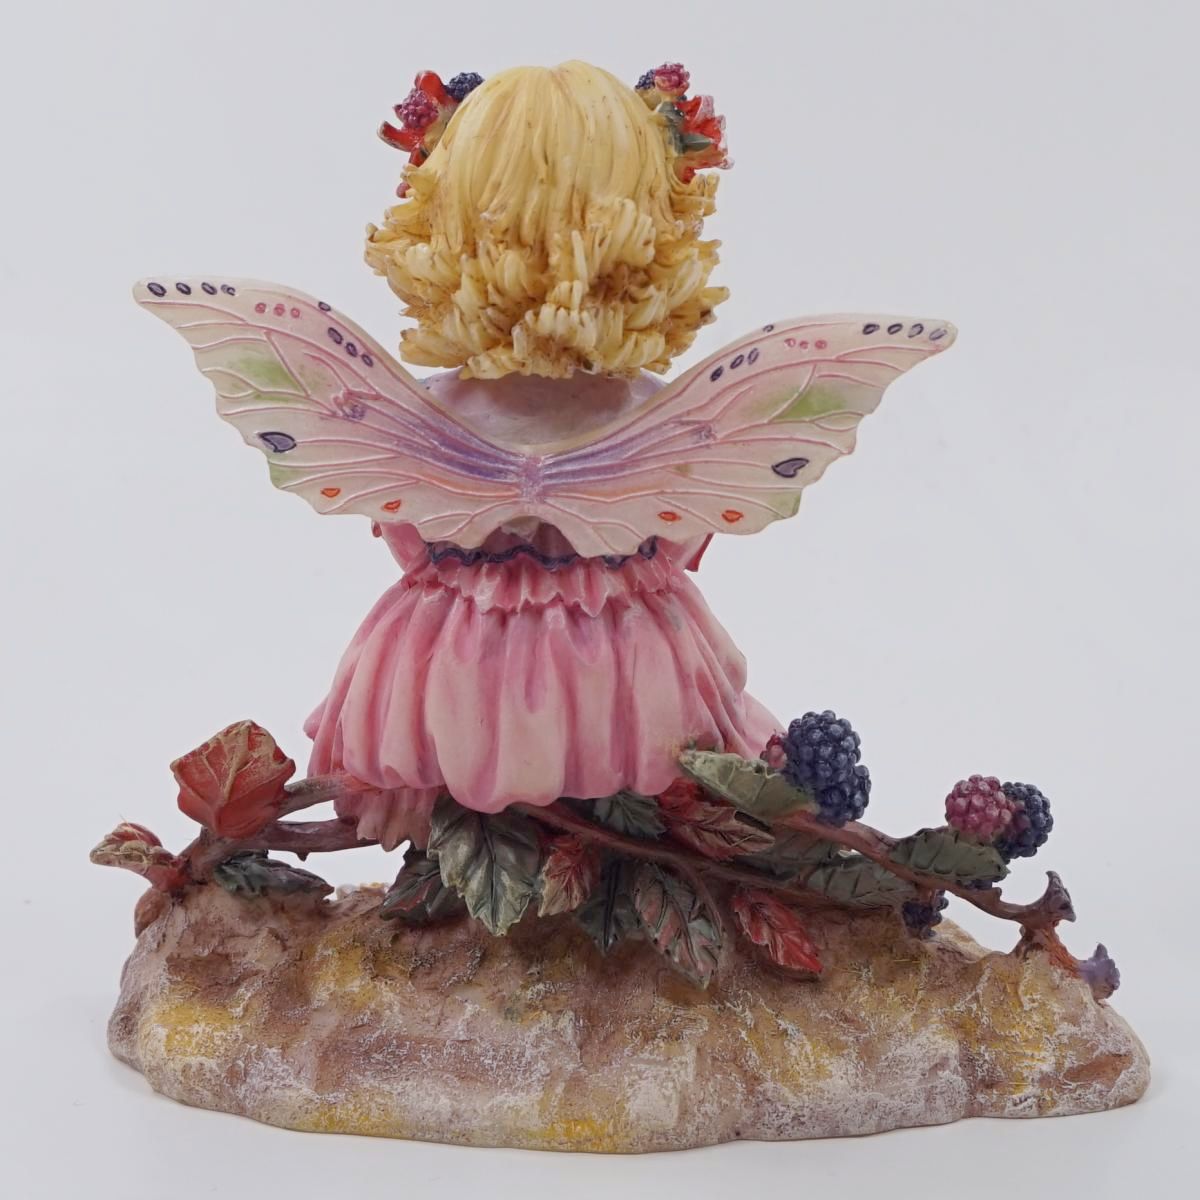 Crisalis Collection★ Brambly Hedge Faerie (4-5652) Standard